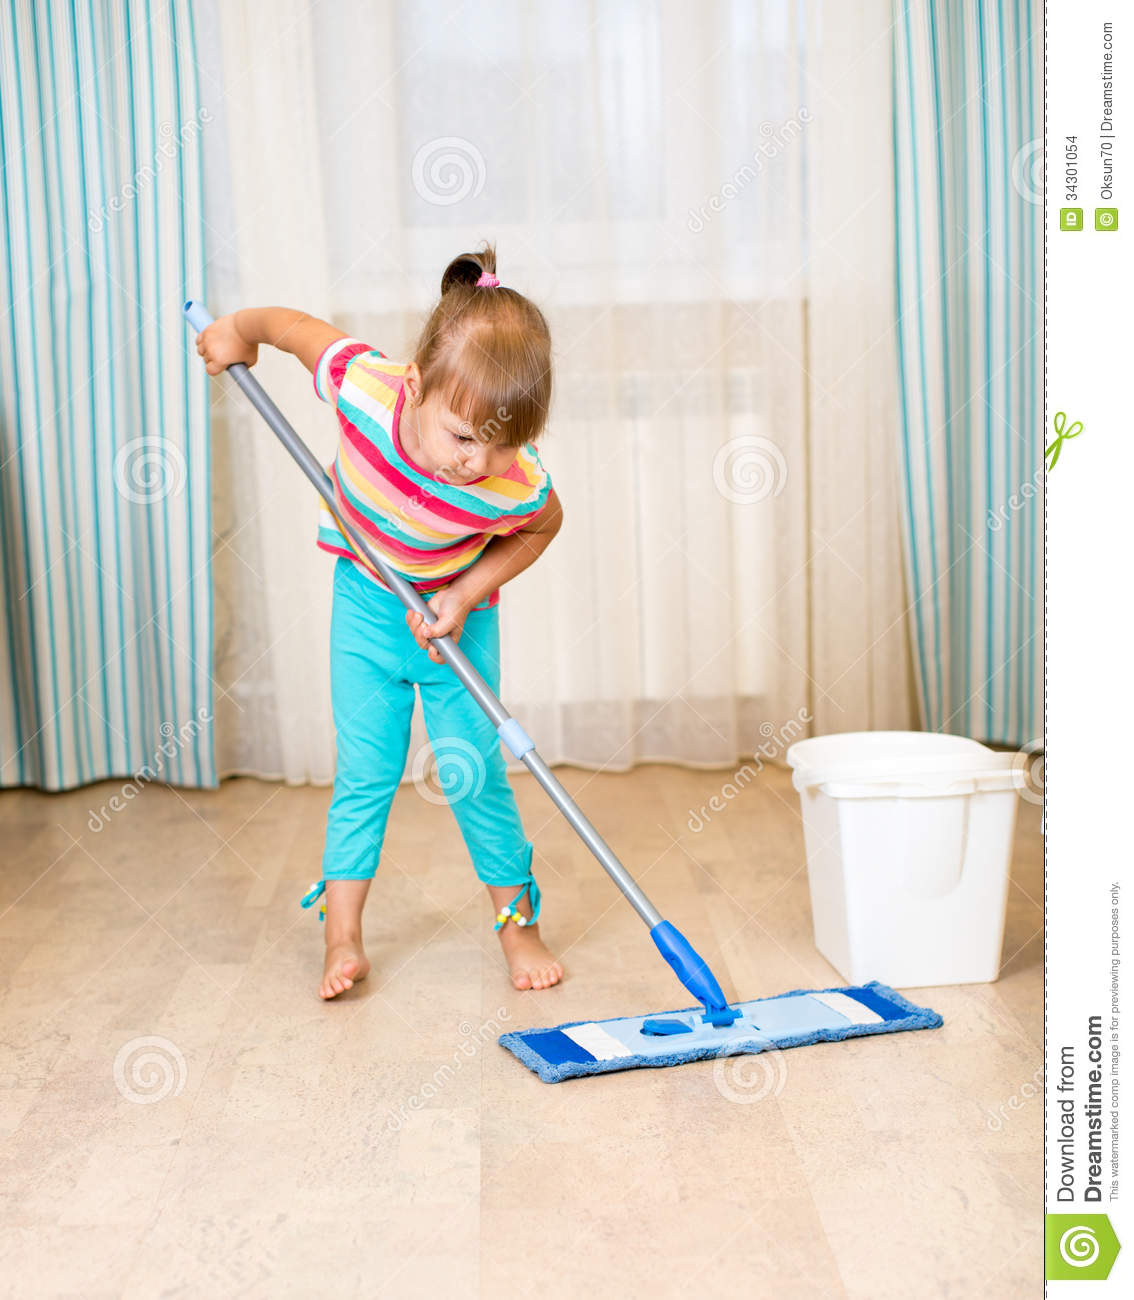 Kid Girl With Mop Stock Images   Image  34301054